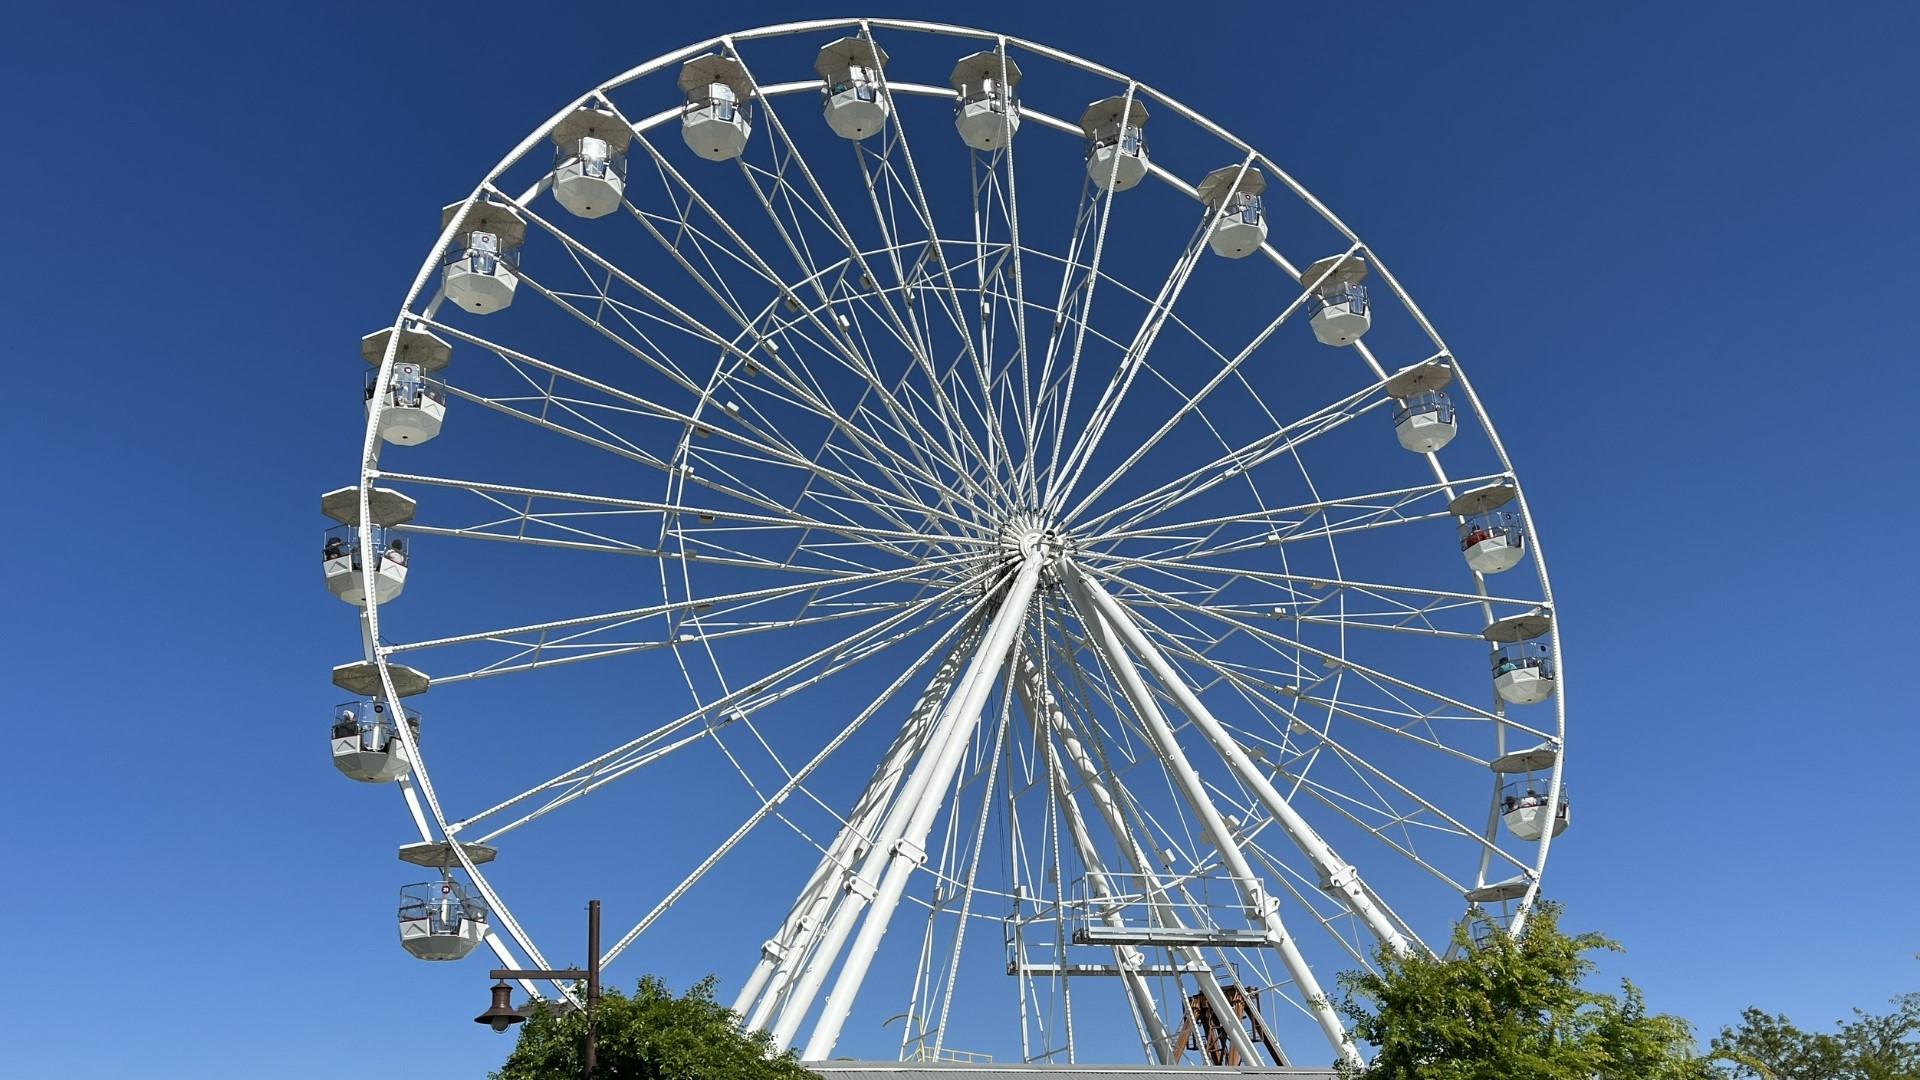 The zoo said the Ferris wheel will run from May 27 until the last day of Boo at the Zoo.